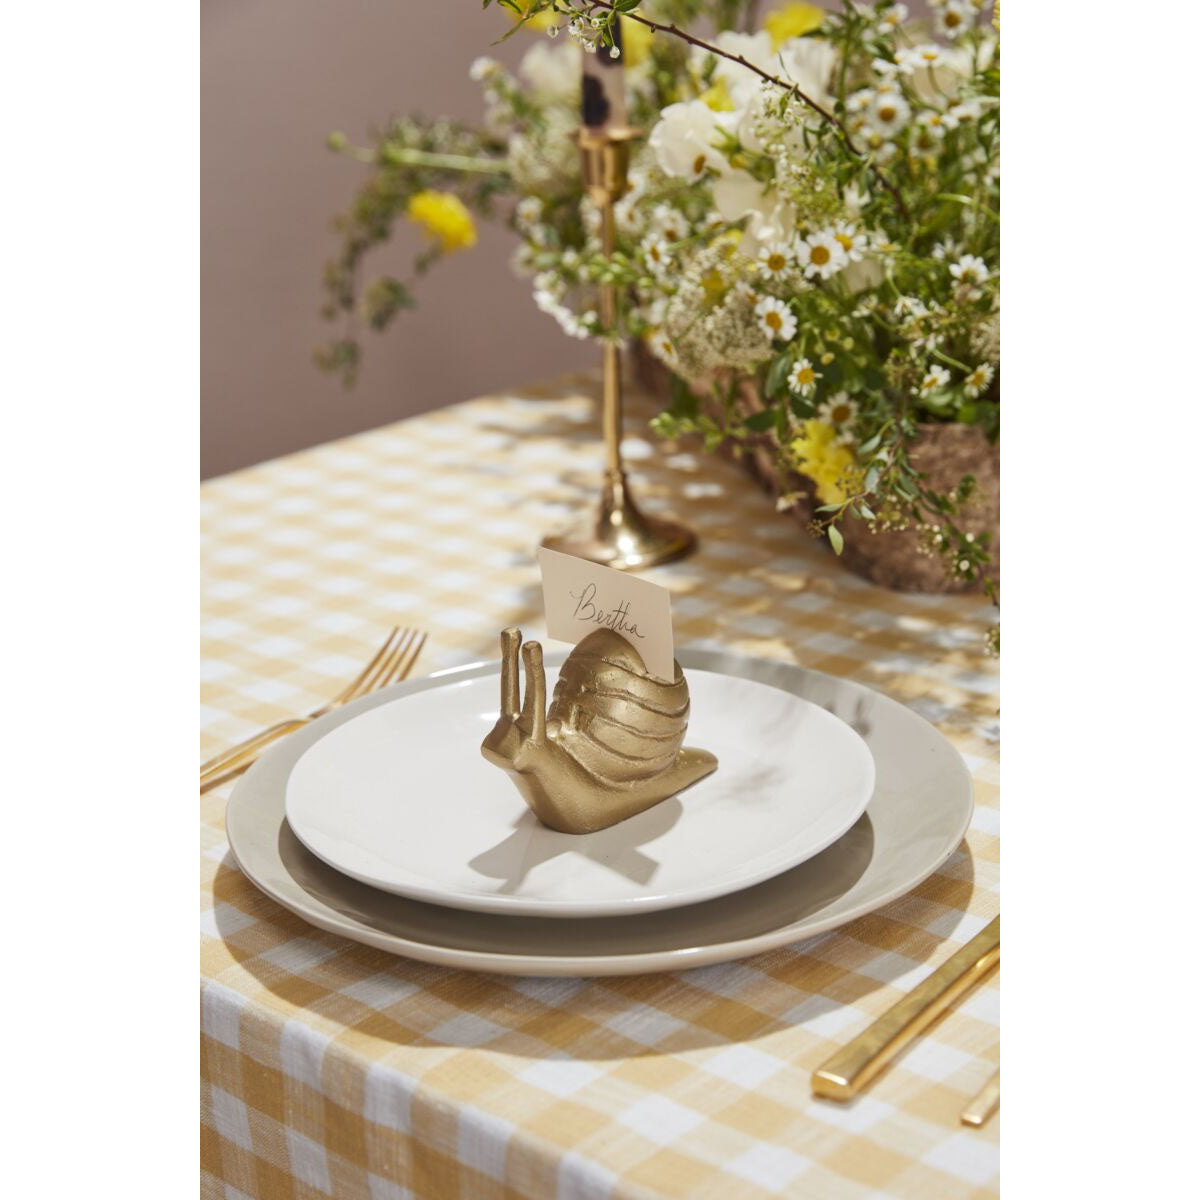 The Little Gold Snail Place Card Holder